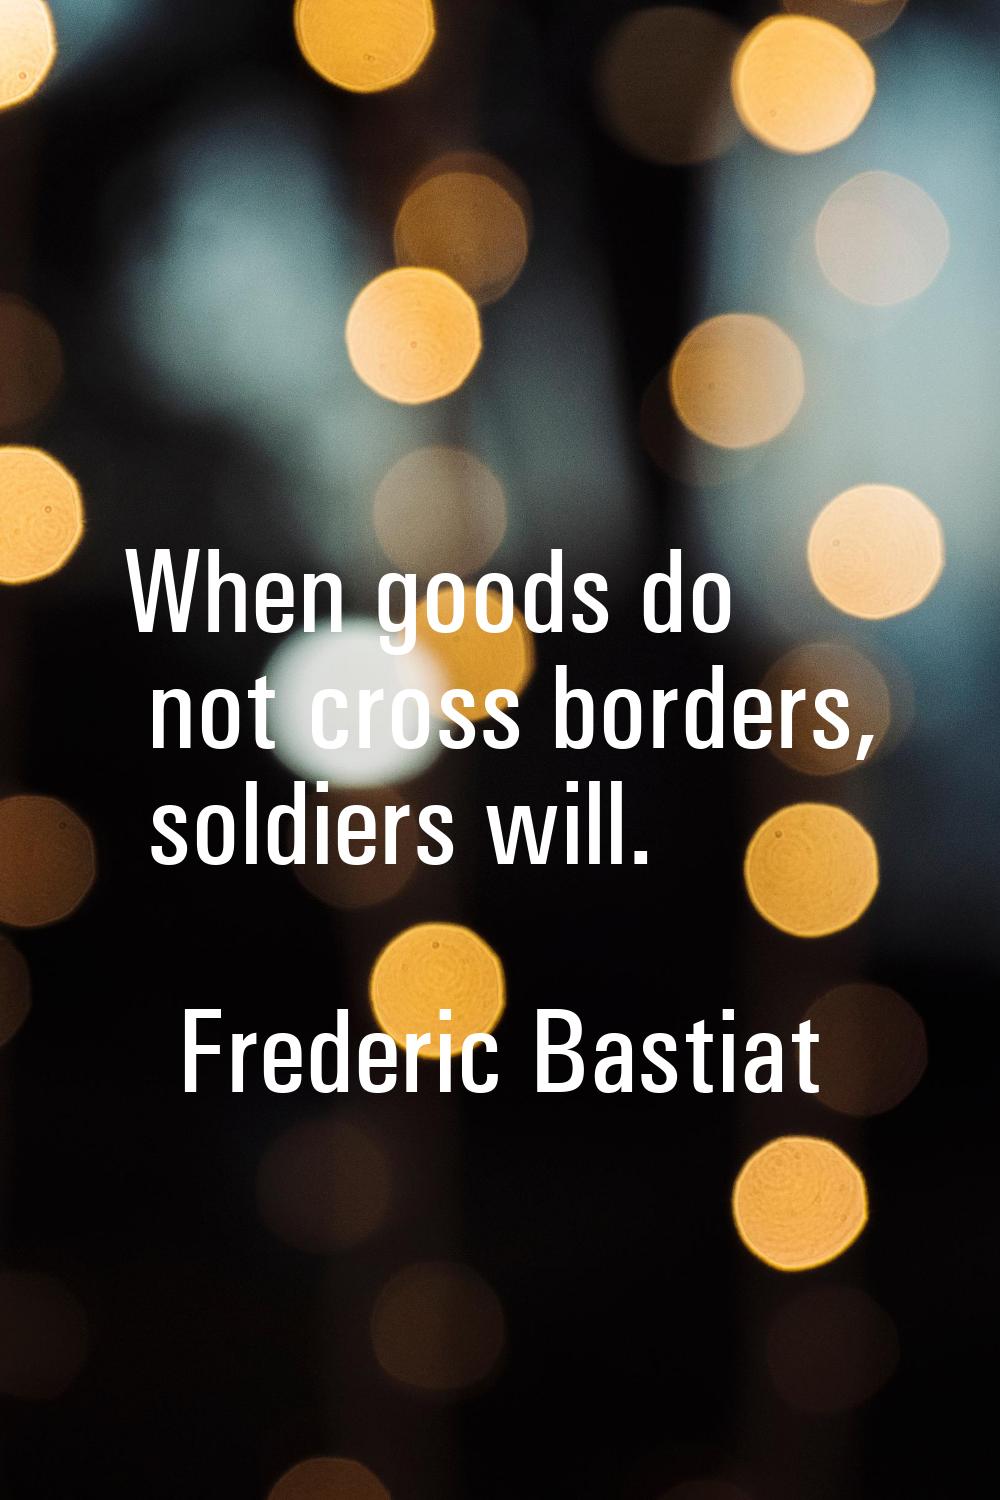 When goods do not cross borders, soldiers will.